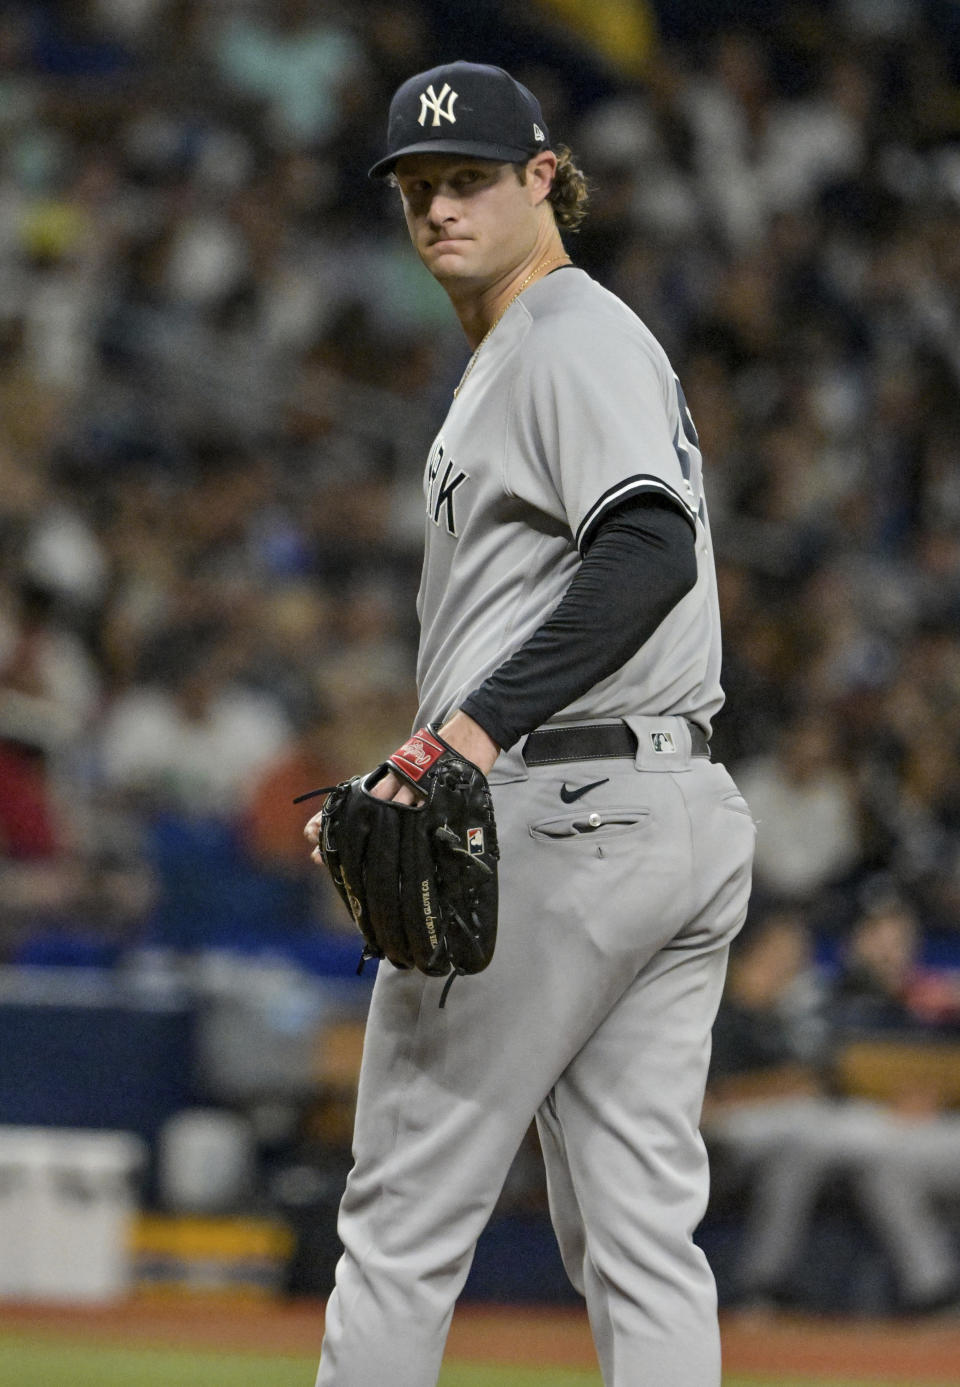 New York Yankees starter Gerrit Cole checks a baserunner during the fifth inning of a baseball game against the Tampa Bay Rays, Monday, June 20, 2022, in St. Petersburg, Fla. (AP Photo/Steve Nesius)